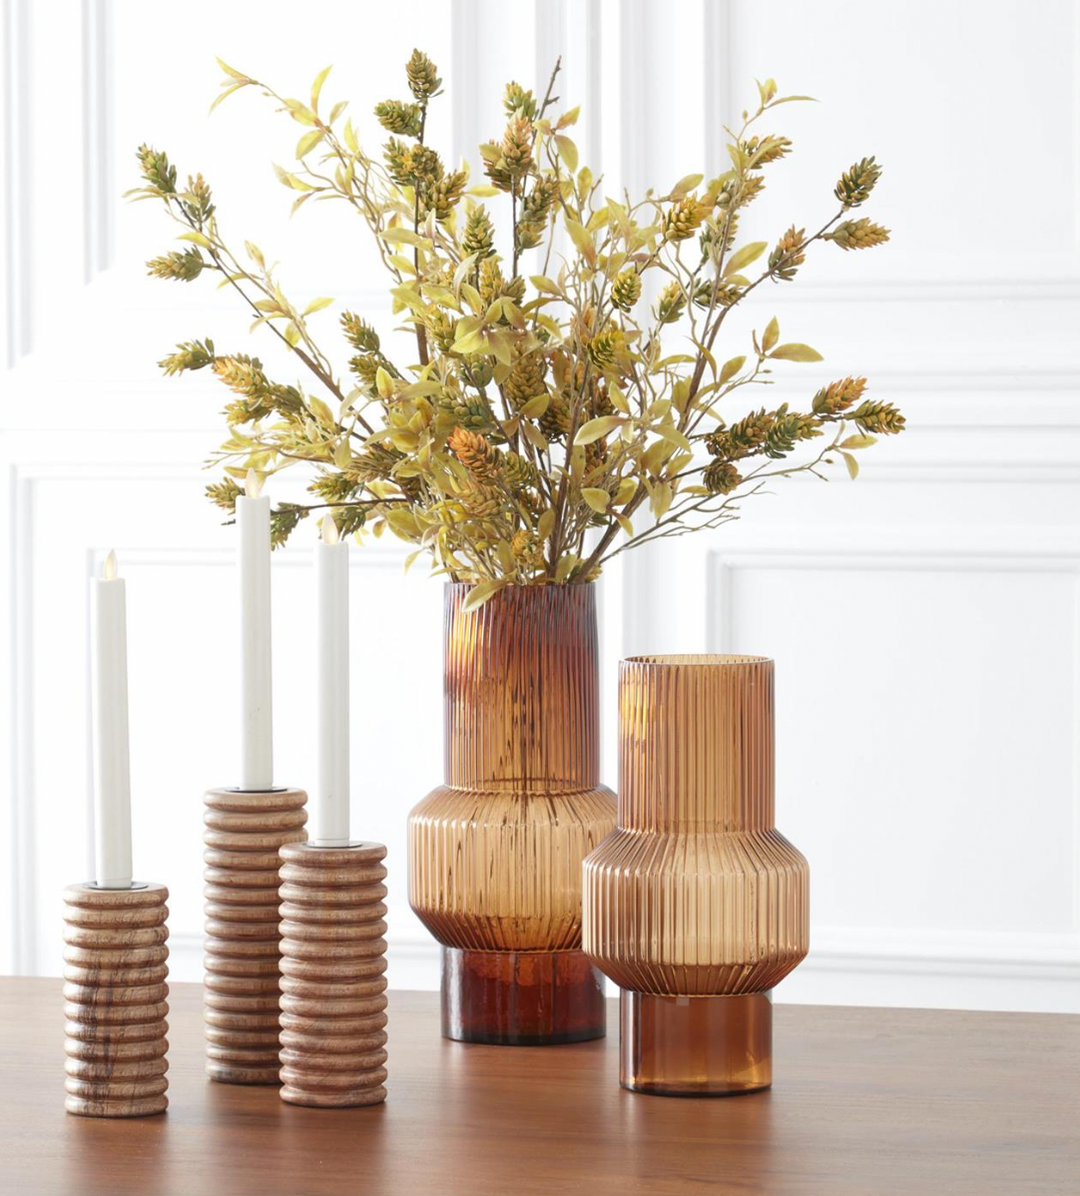 Amber ribbed vases